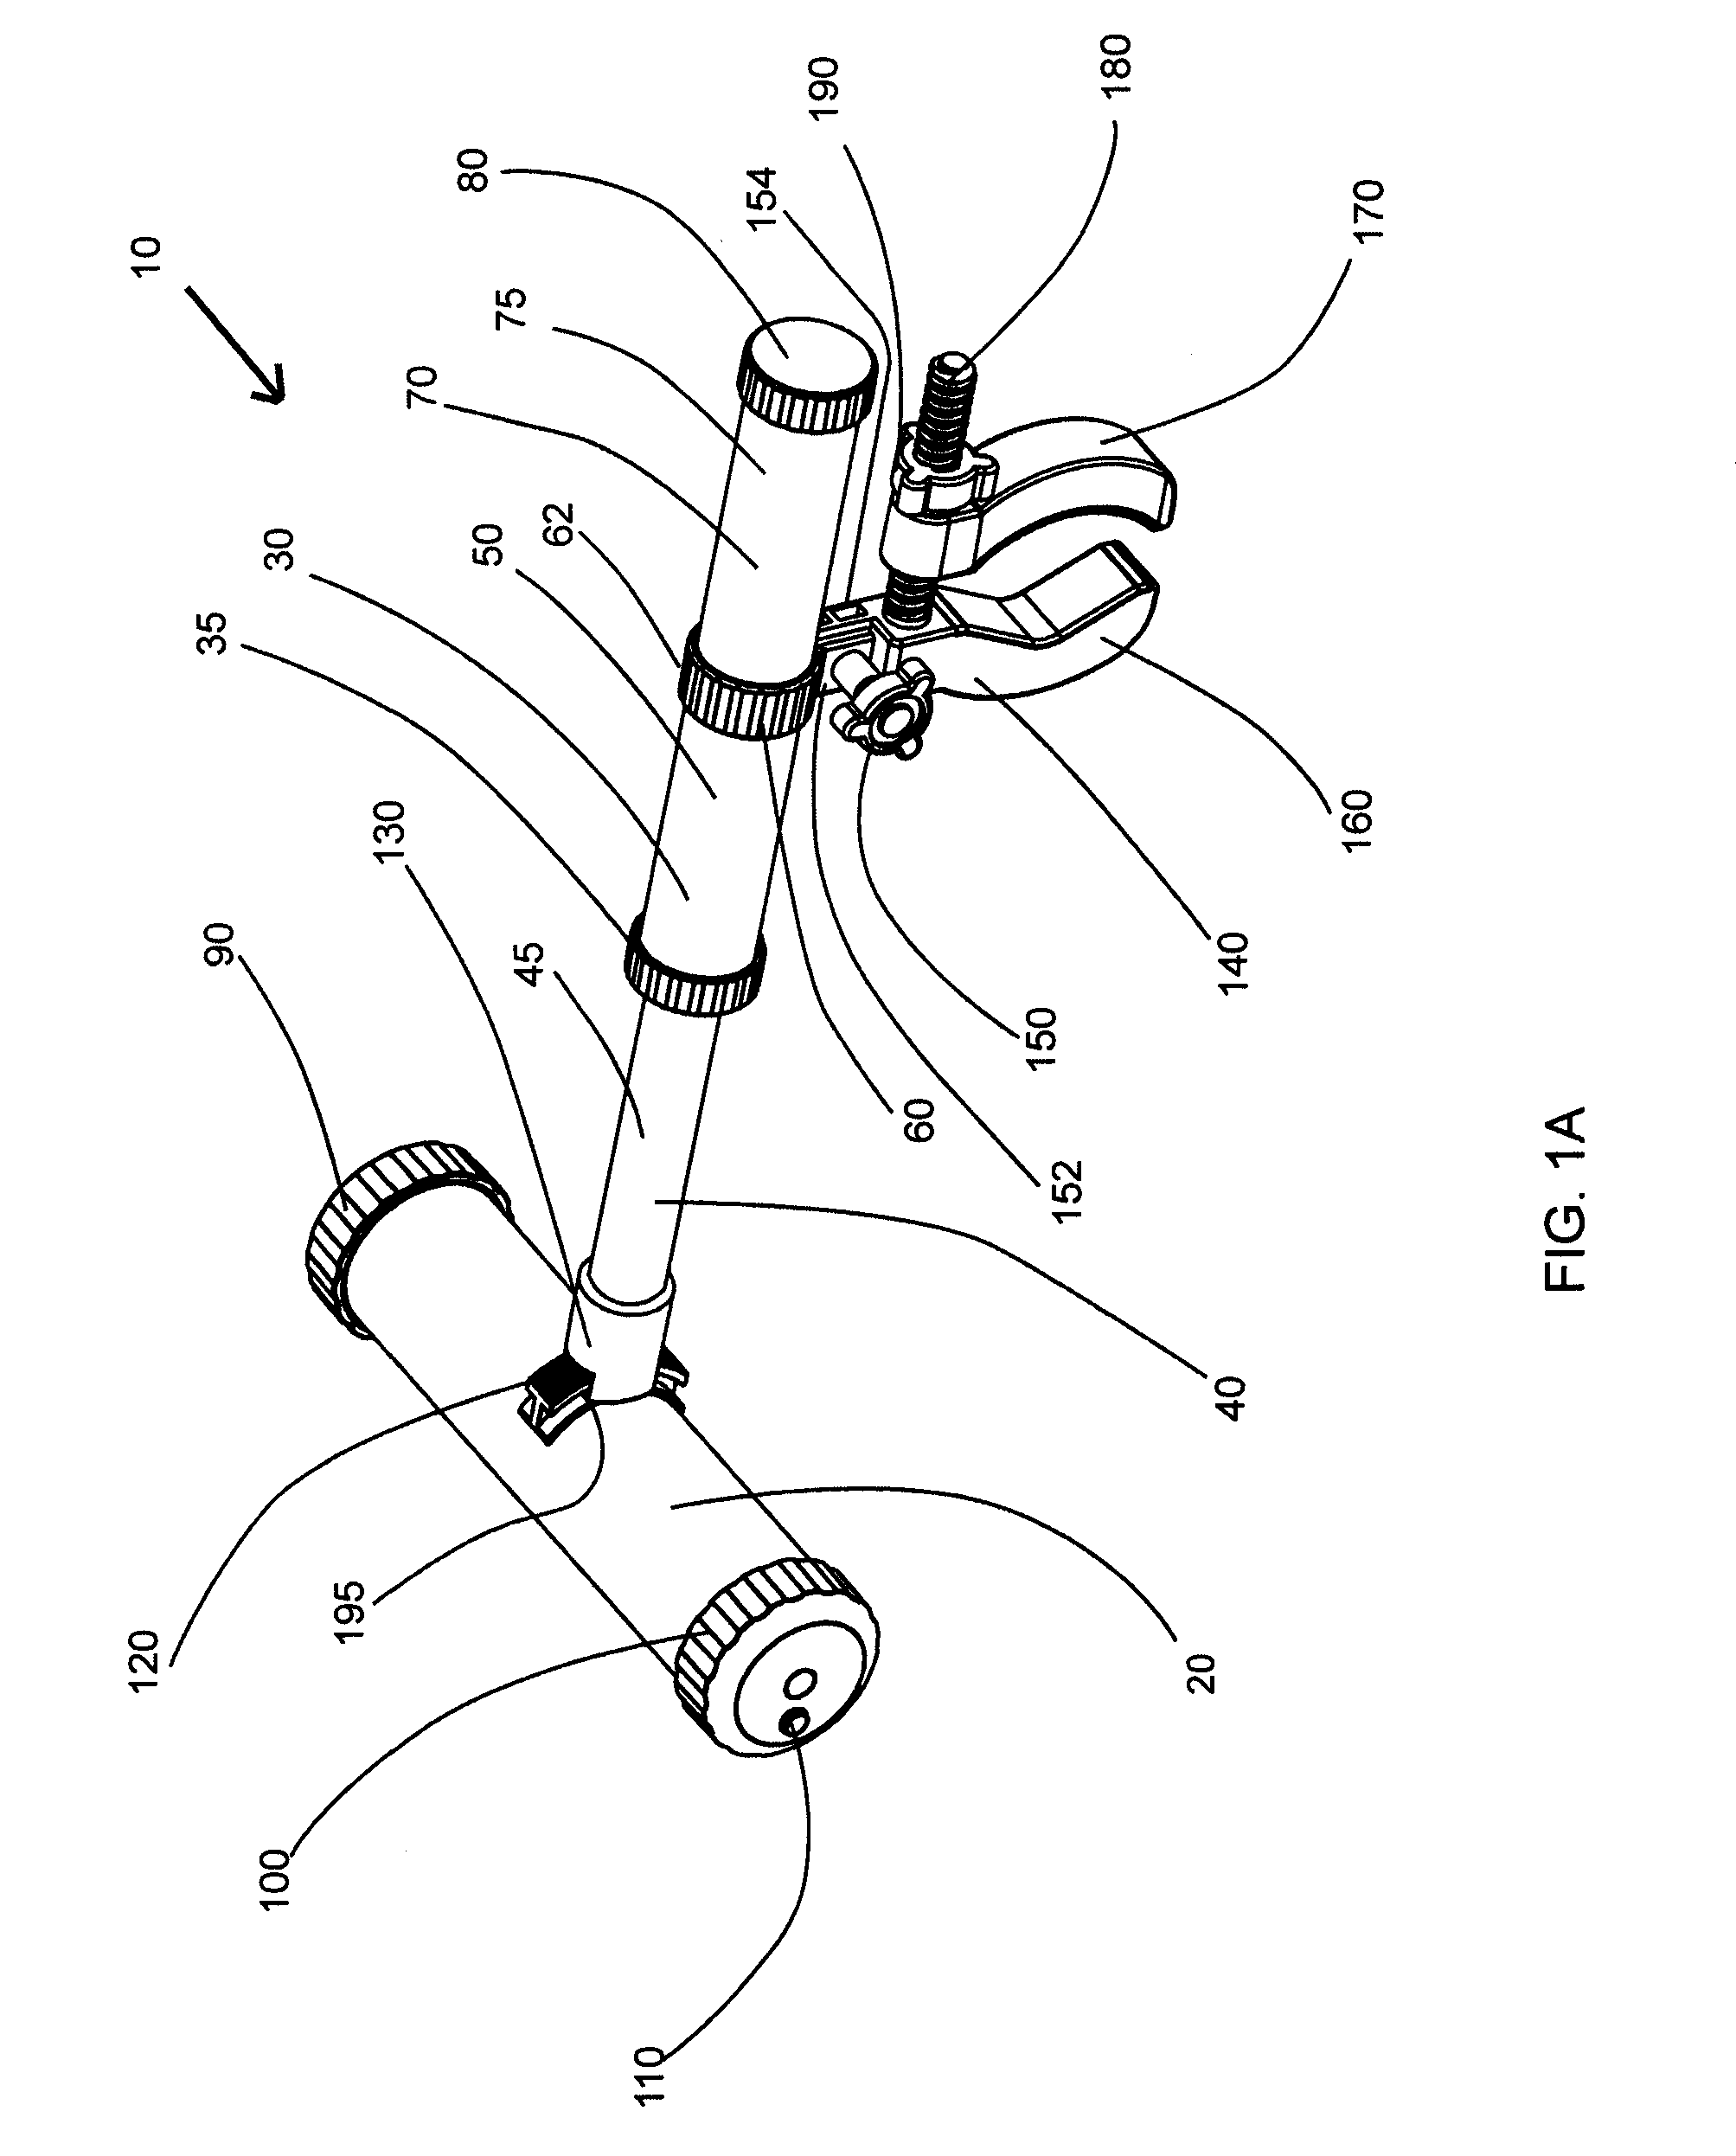 Variably-adjustable grill light and method of use thereof